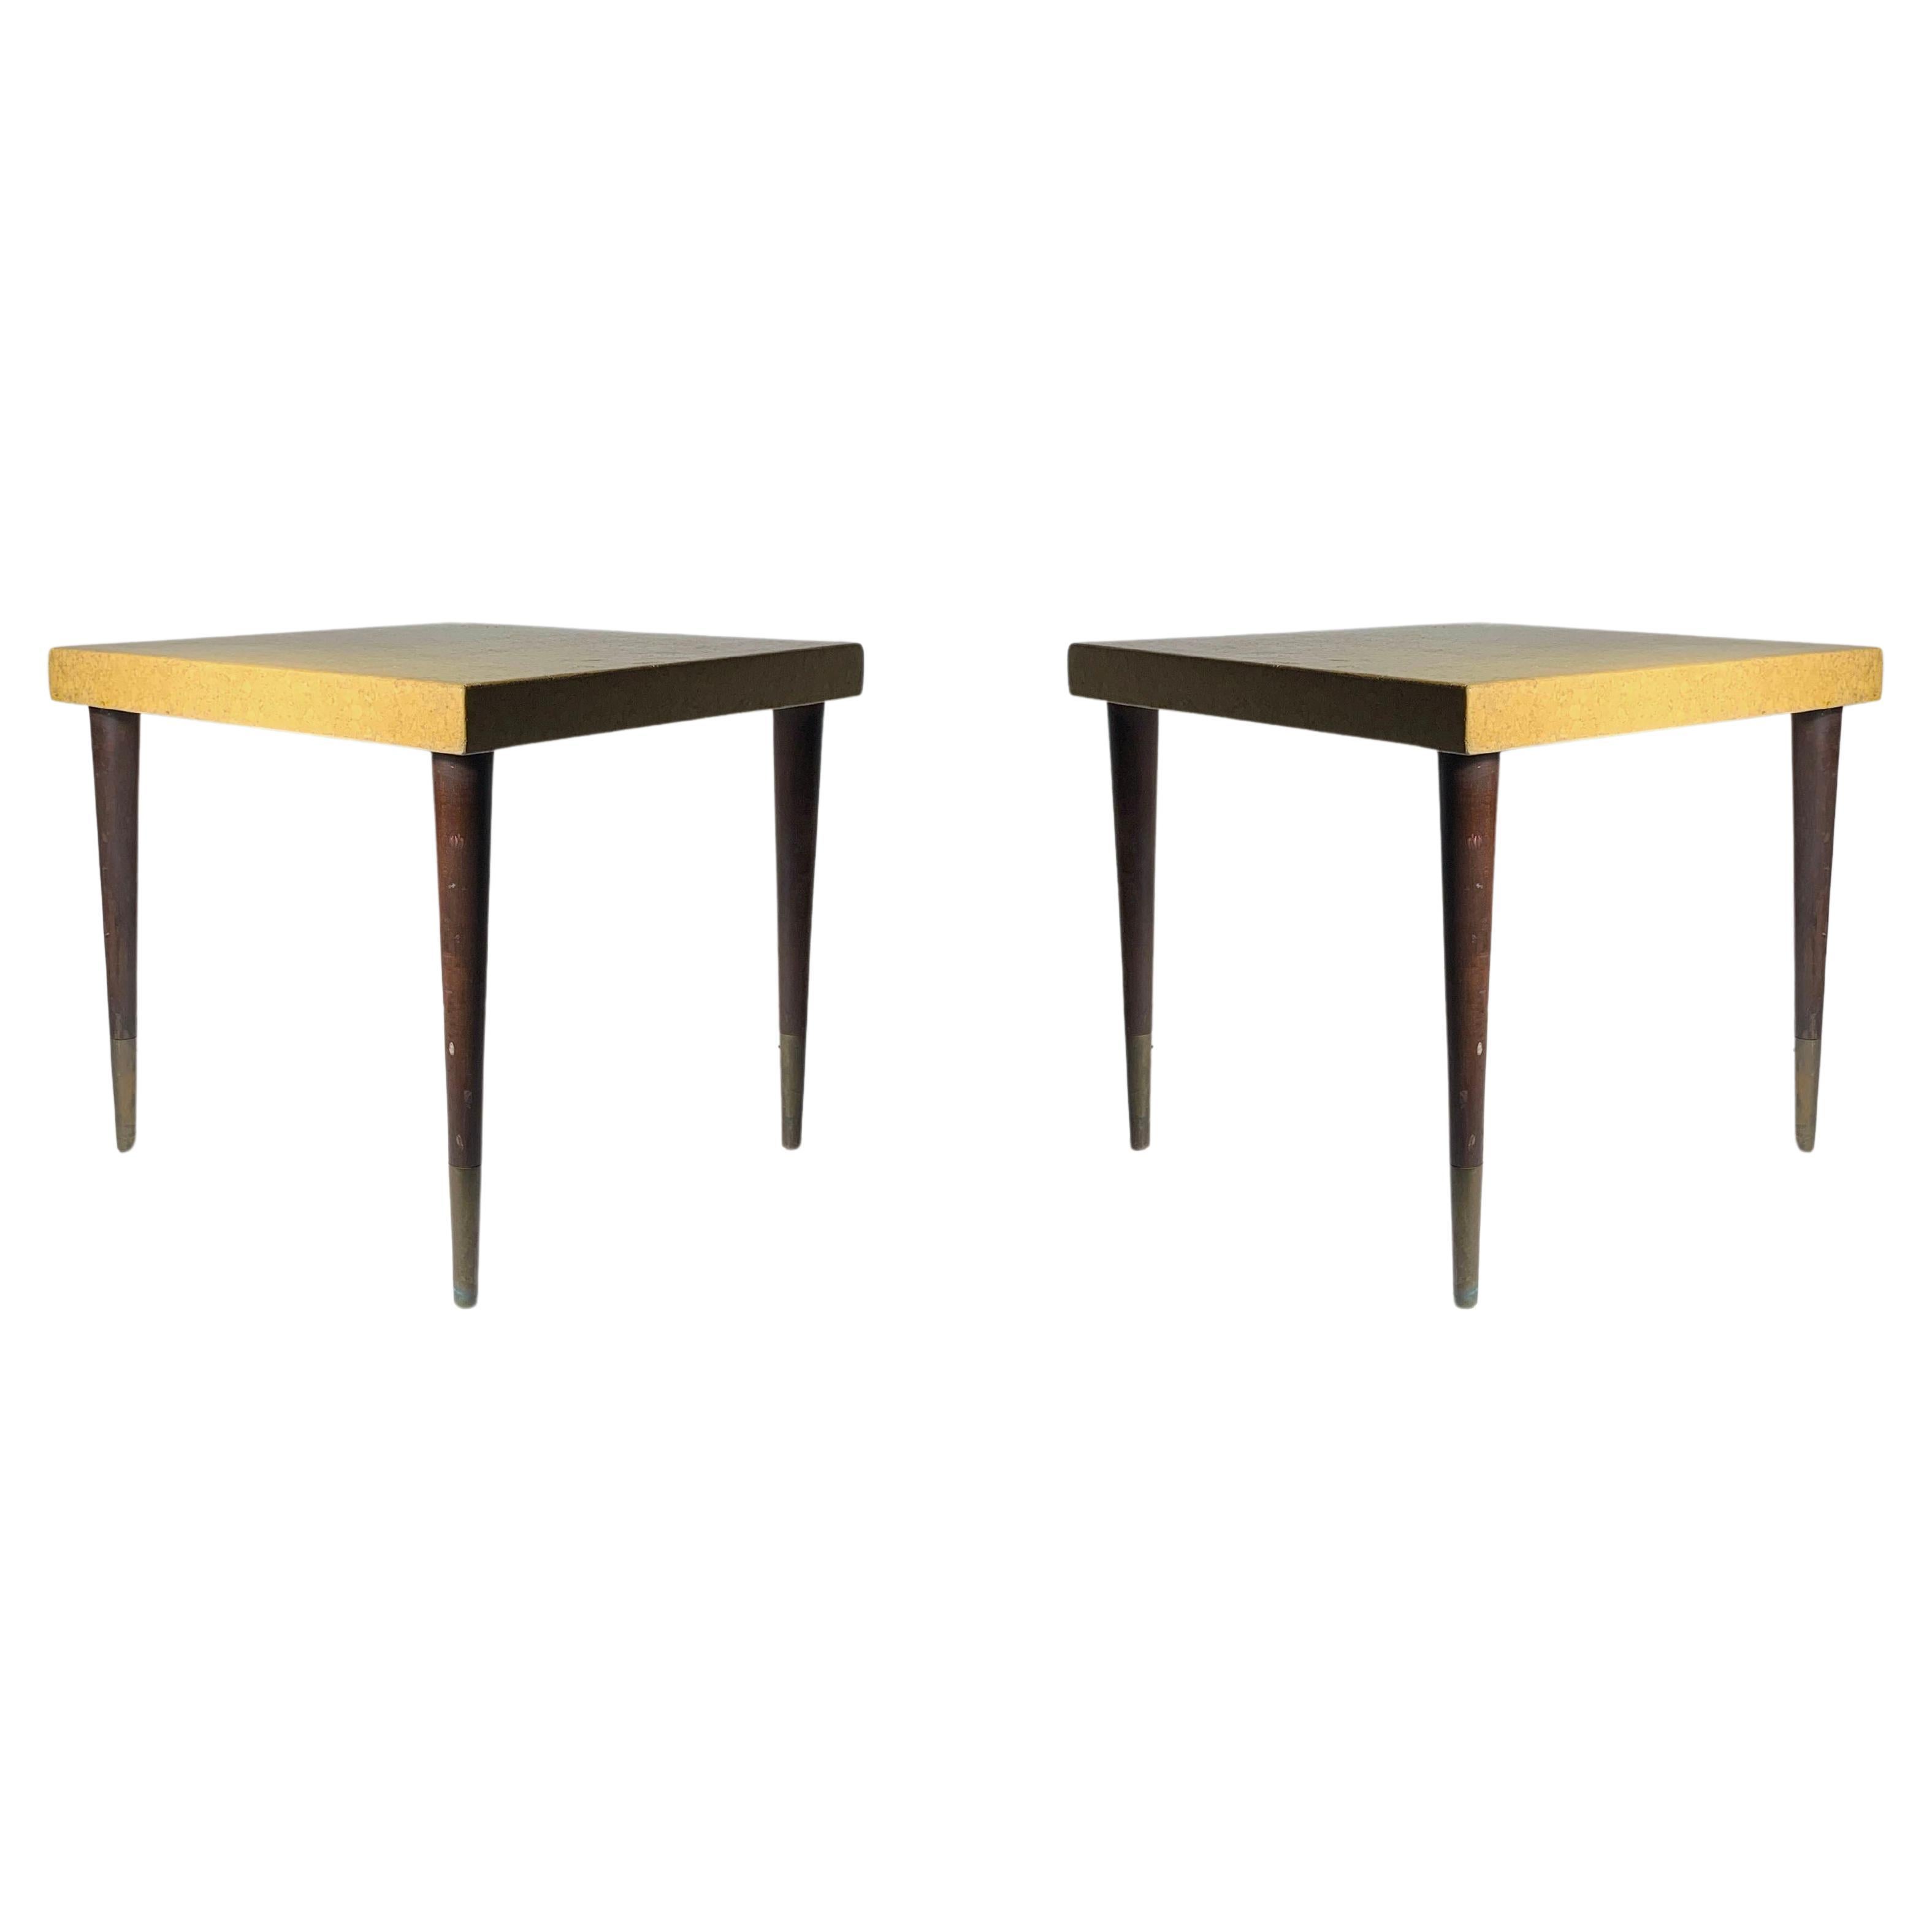  Johnson Furniture Company Side Tables